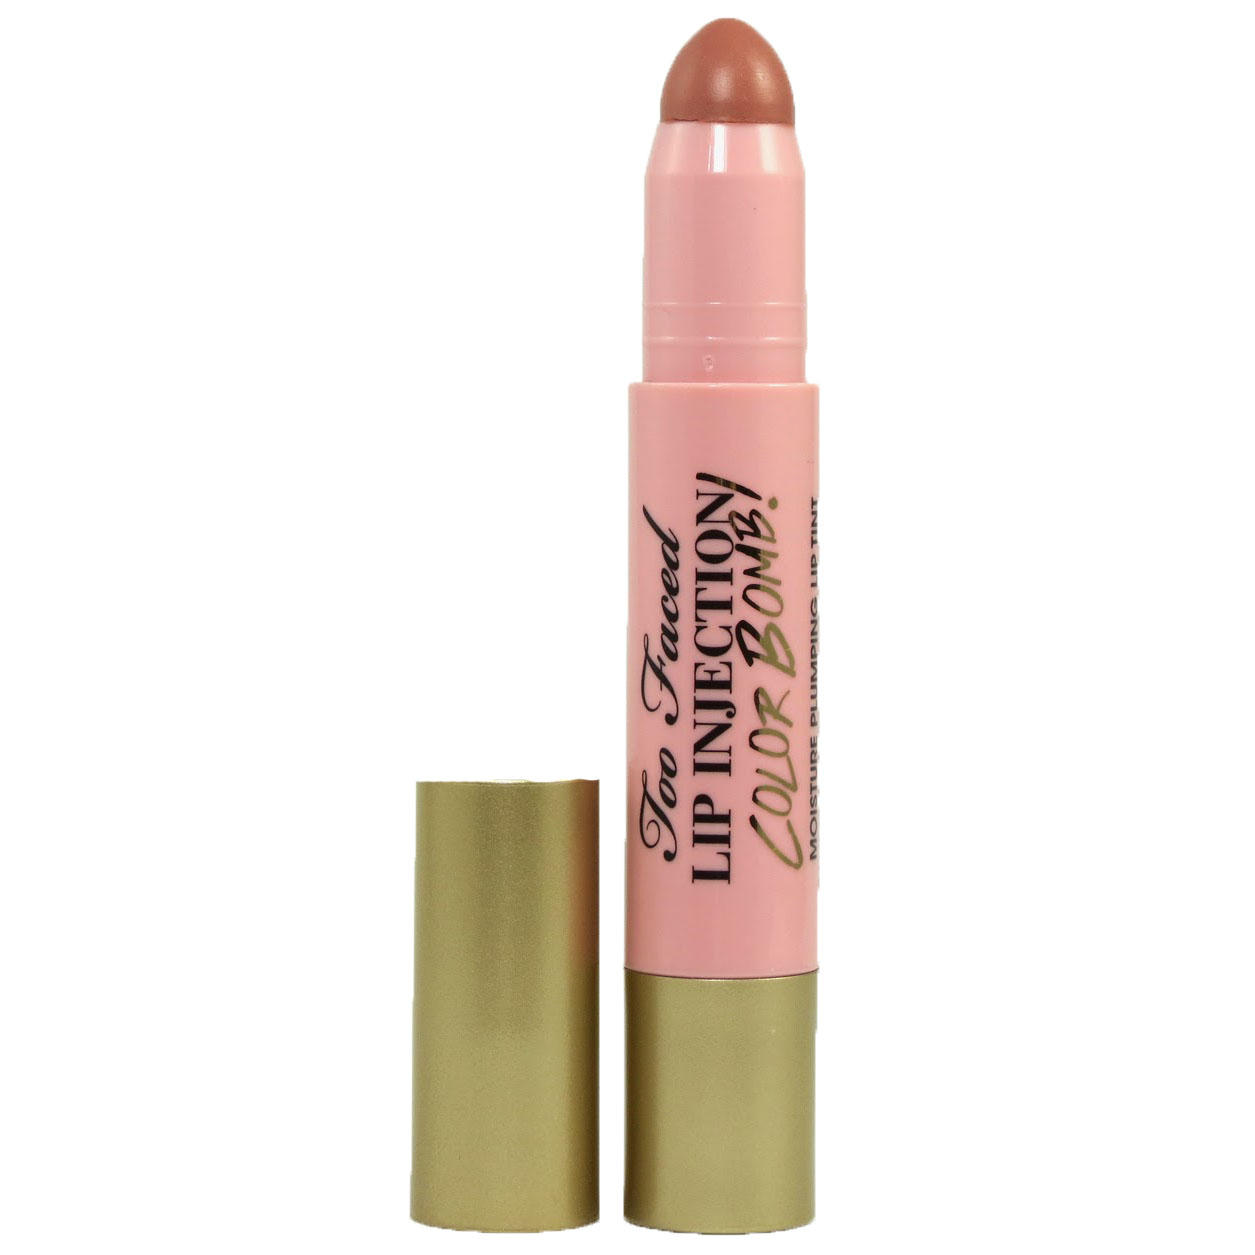 Too Faced Lip Injection Color Bomb! Moisture Plumping Lip Tint Bee Sting